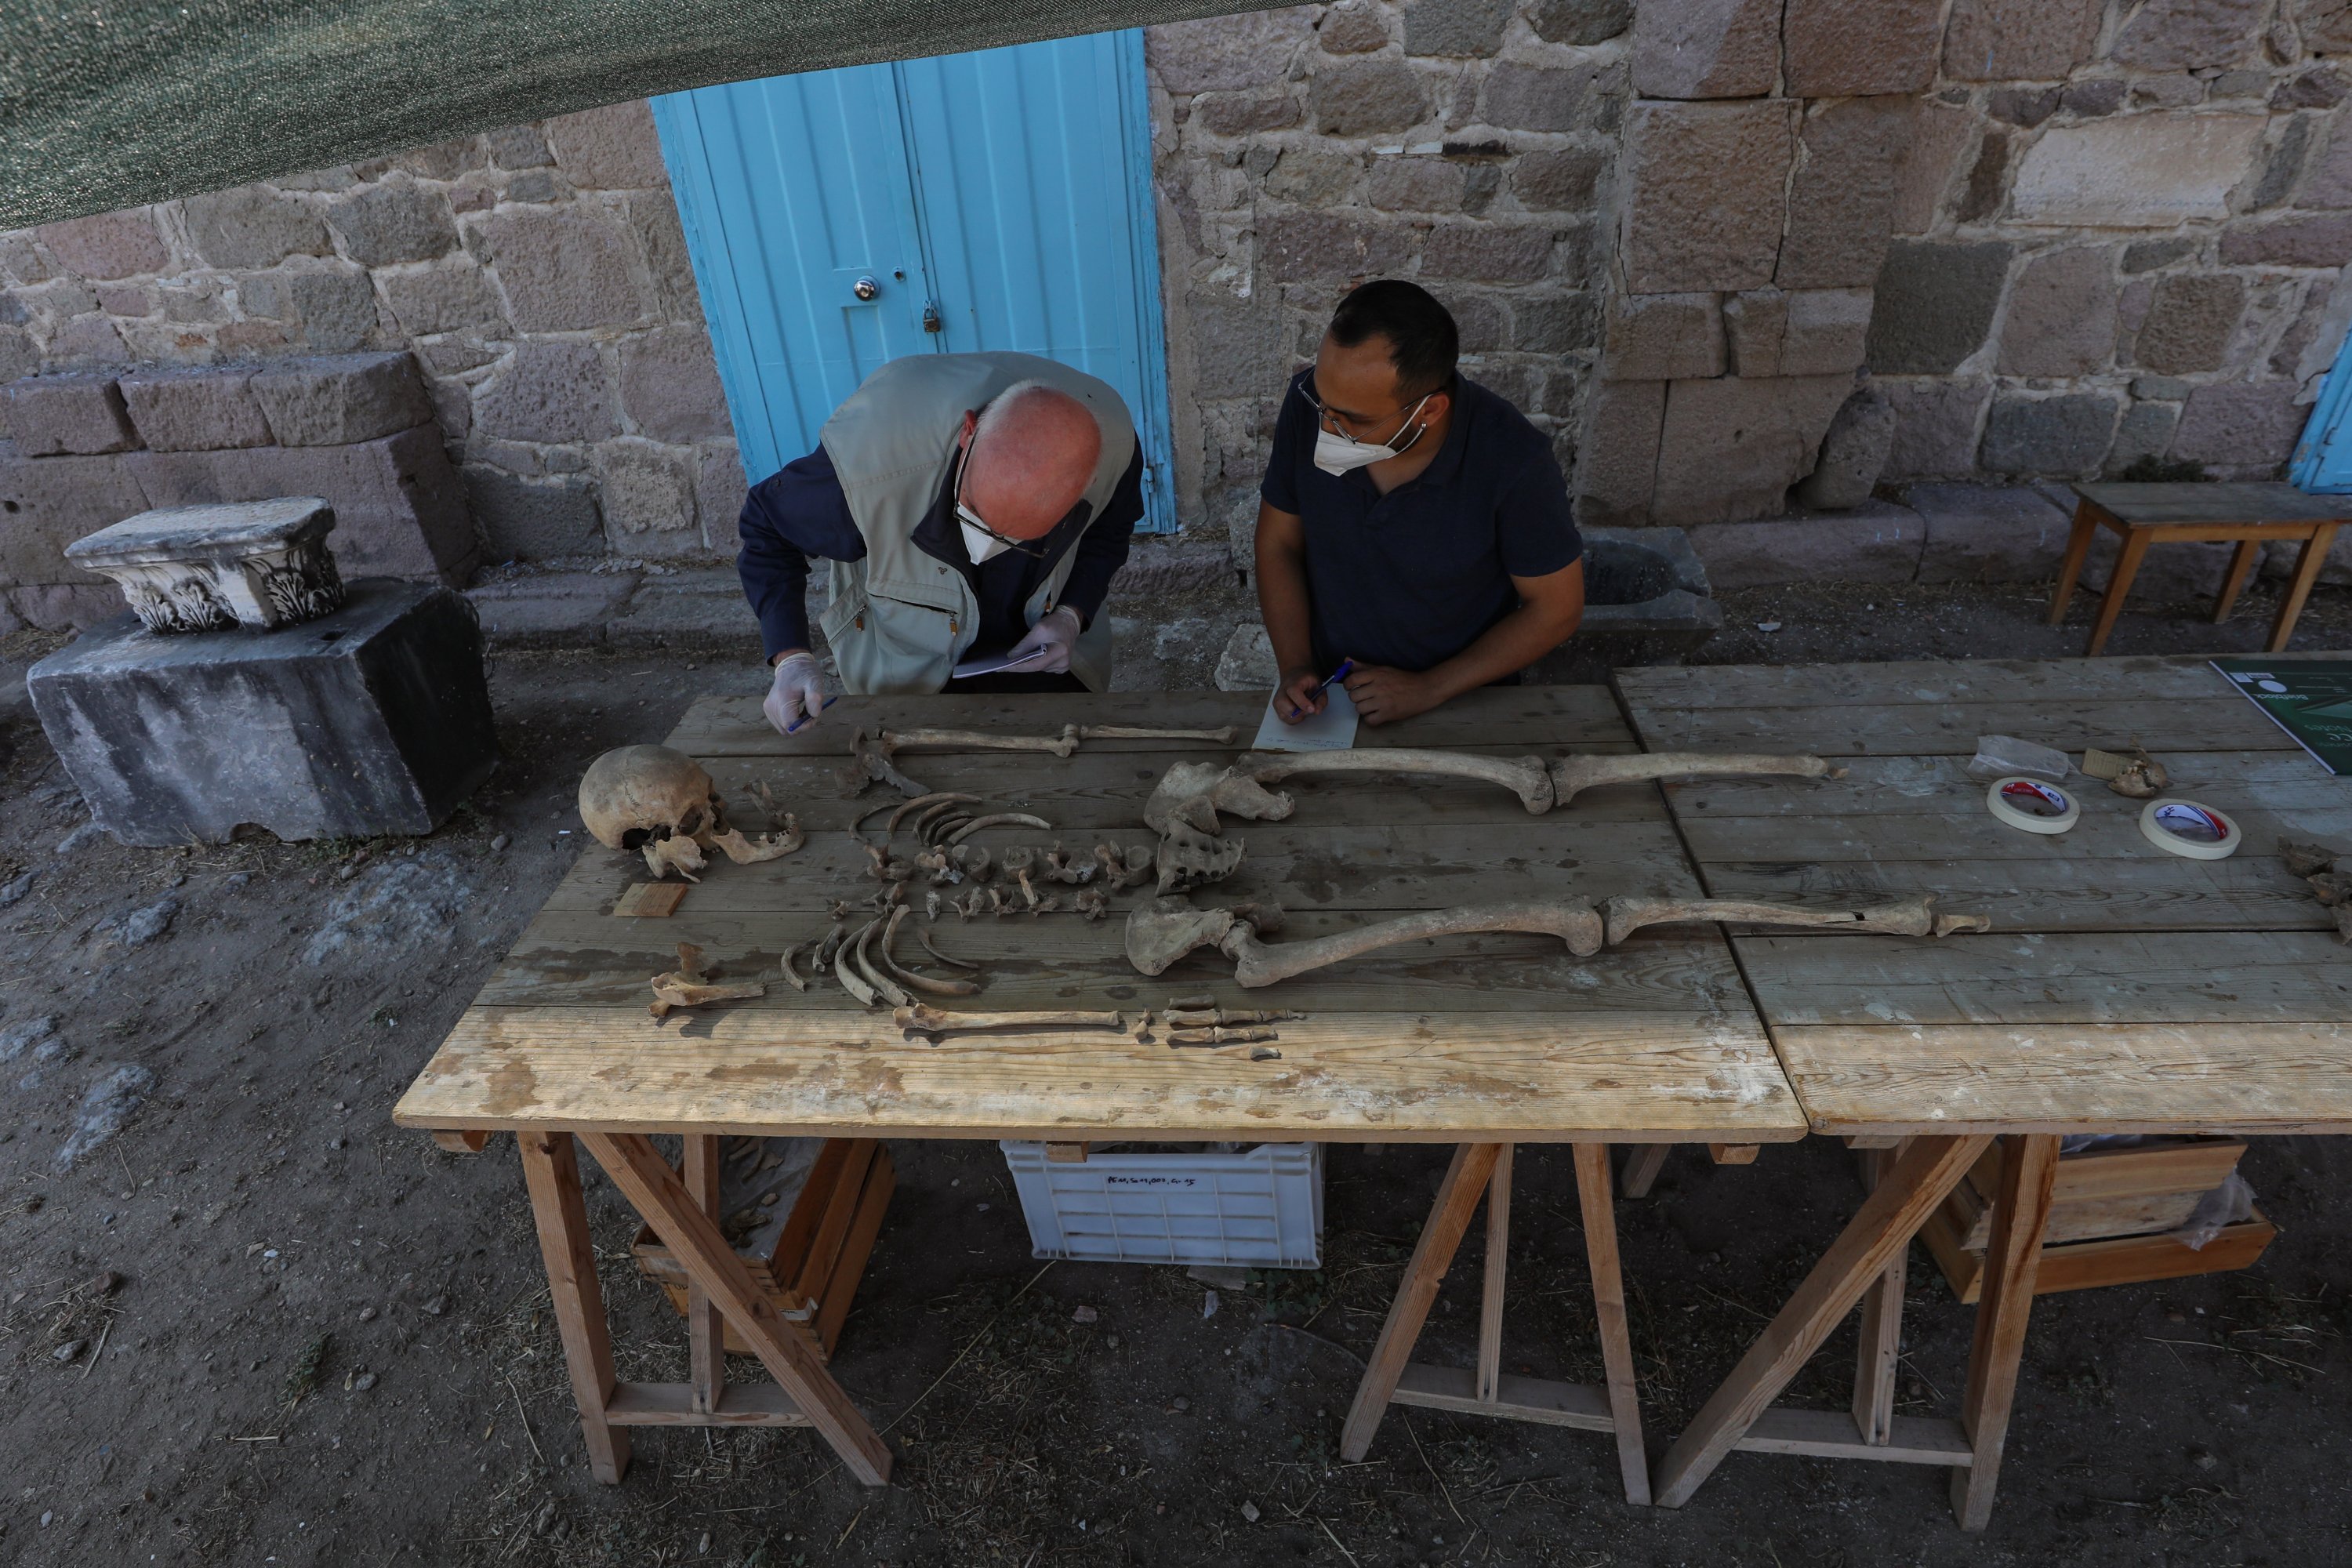 Turkish and German scientists working on skeletons unearthed in Pergamon also find locals suffered from tooth, sinus diseases. (AA Photo)